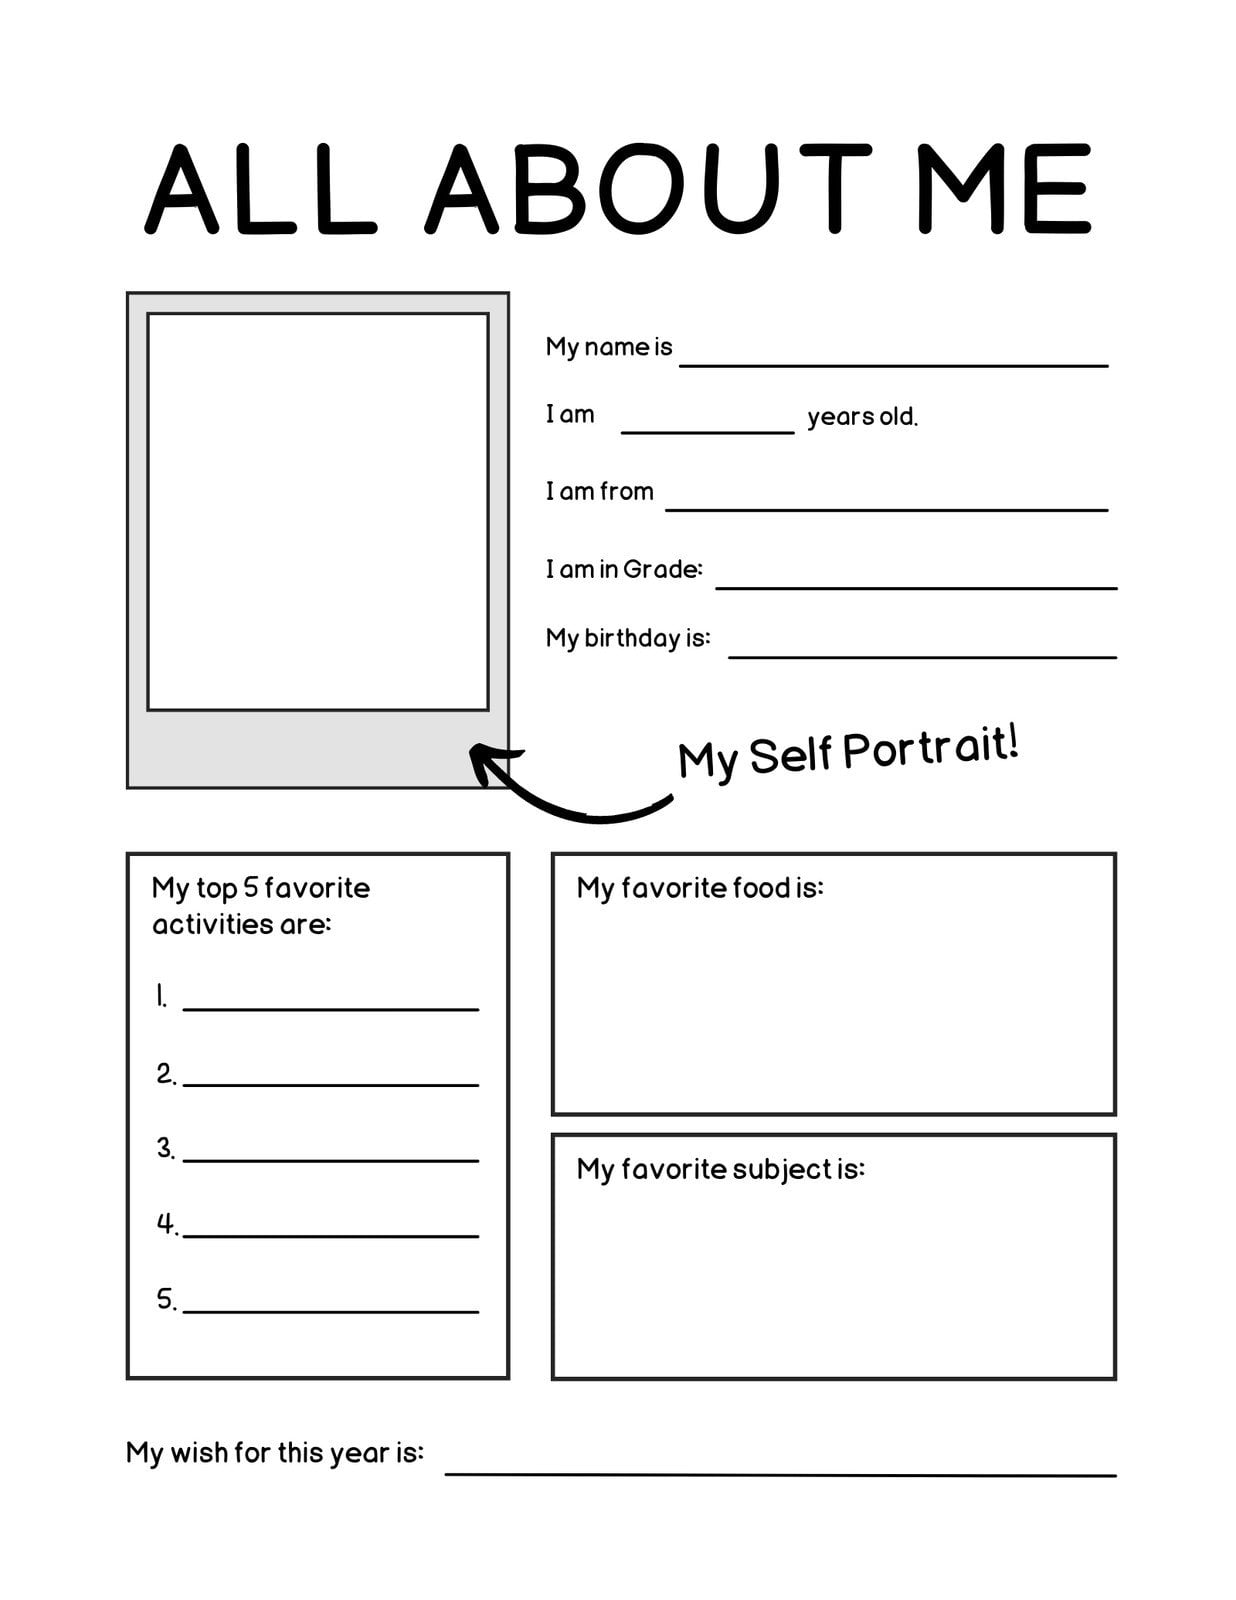 all-about-me-template-take-the-pentake-the-pen